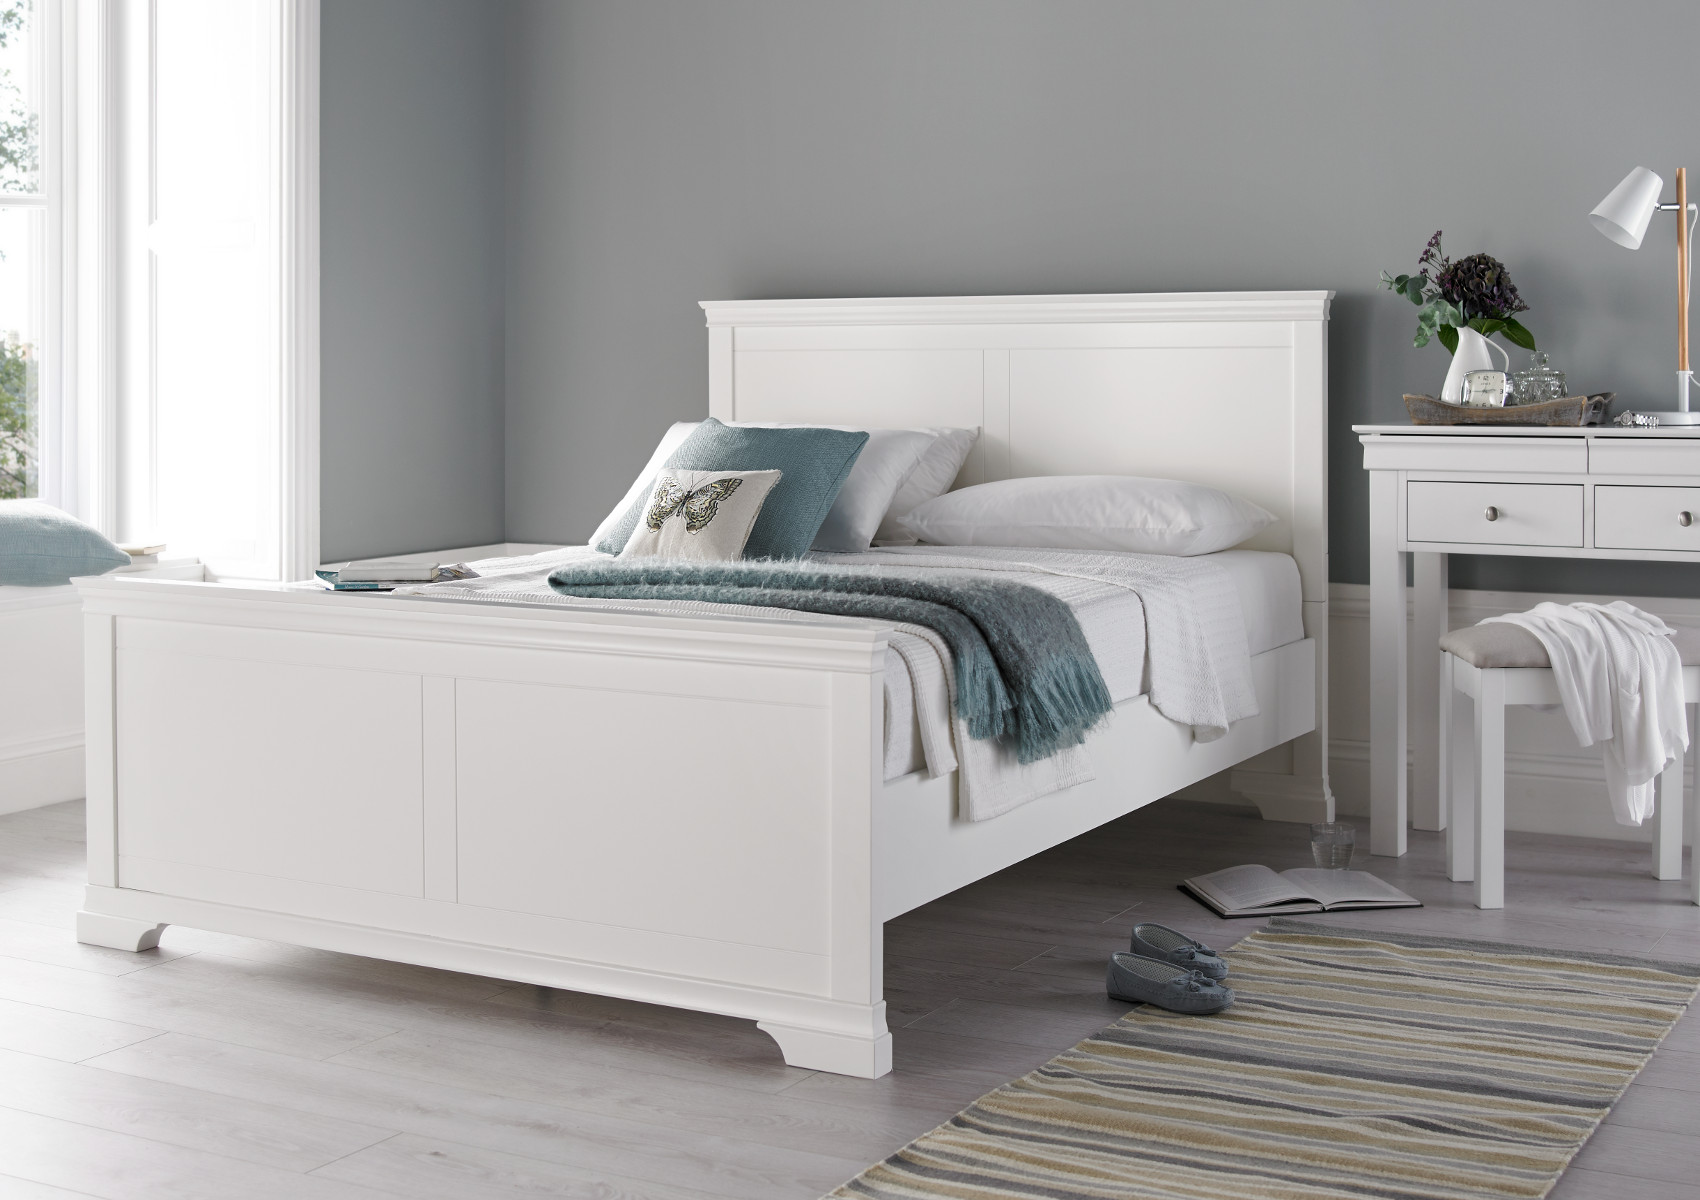 View Chateaux White Wooden Bed Frame Time4Sleep information